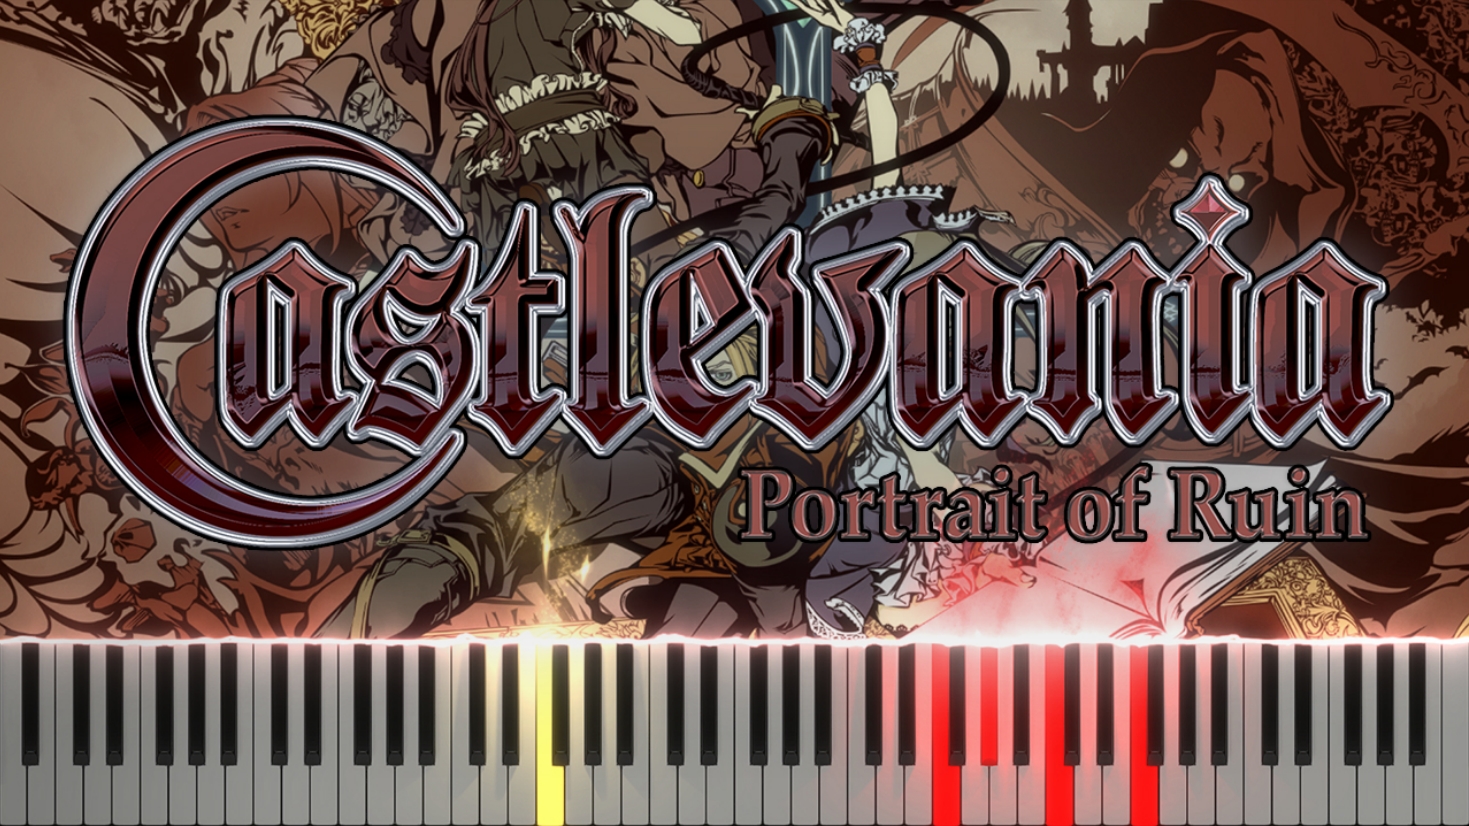 Gaze Up at the Darkness (Castlevania: Portrait of Ruin) - Synthesia / Piano Tutorial